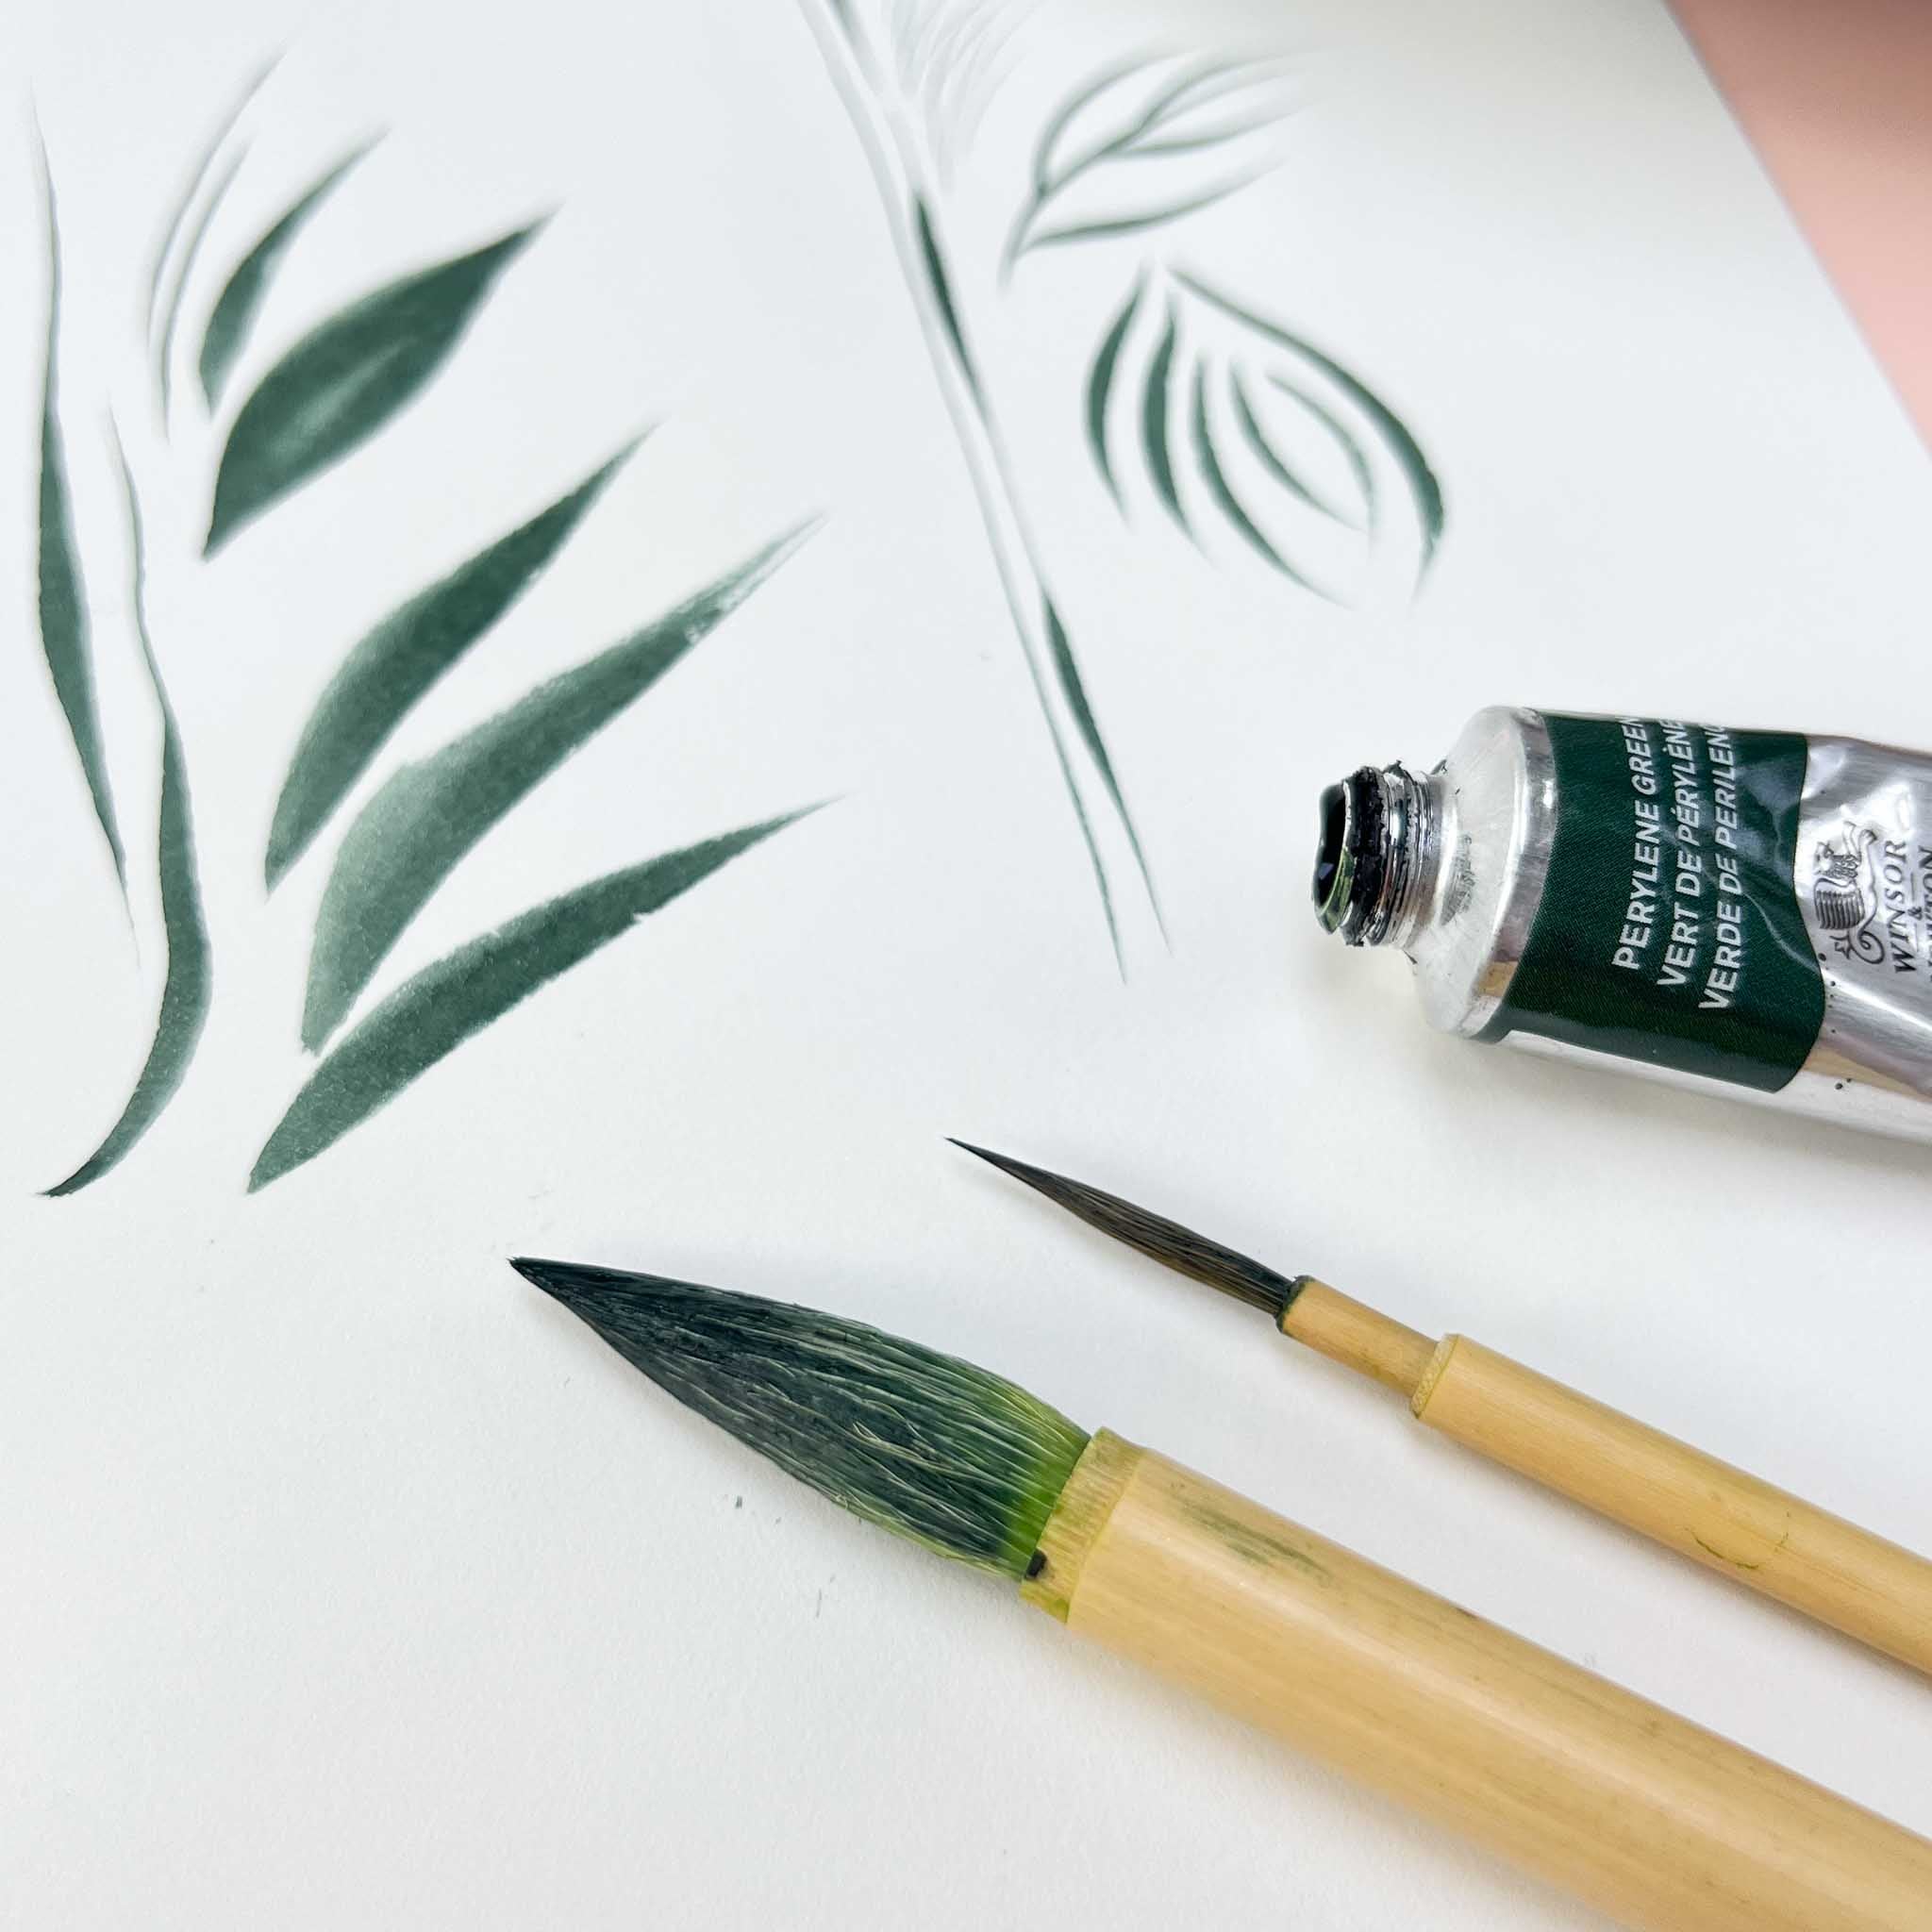 Diane Hill's chinoiserie paint brushes and painting examples